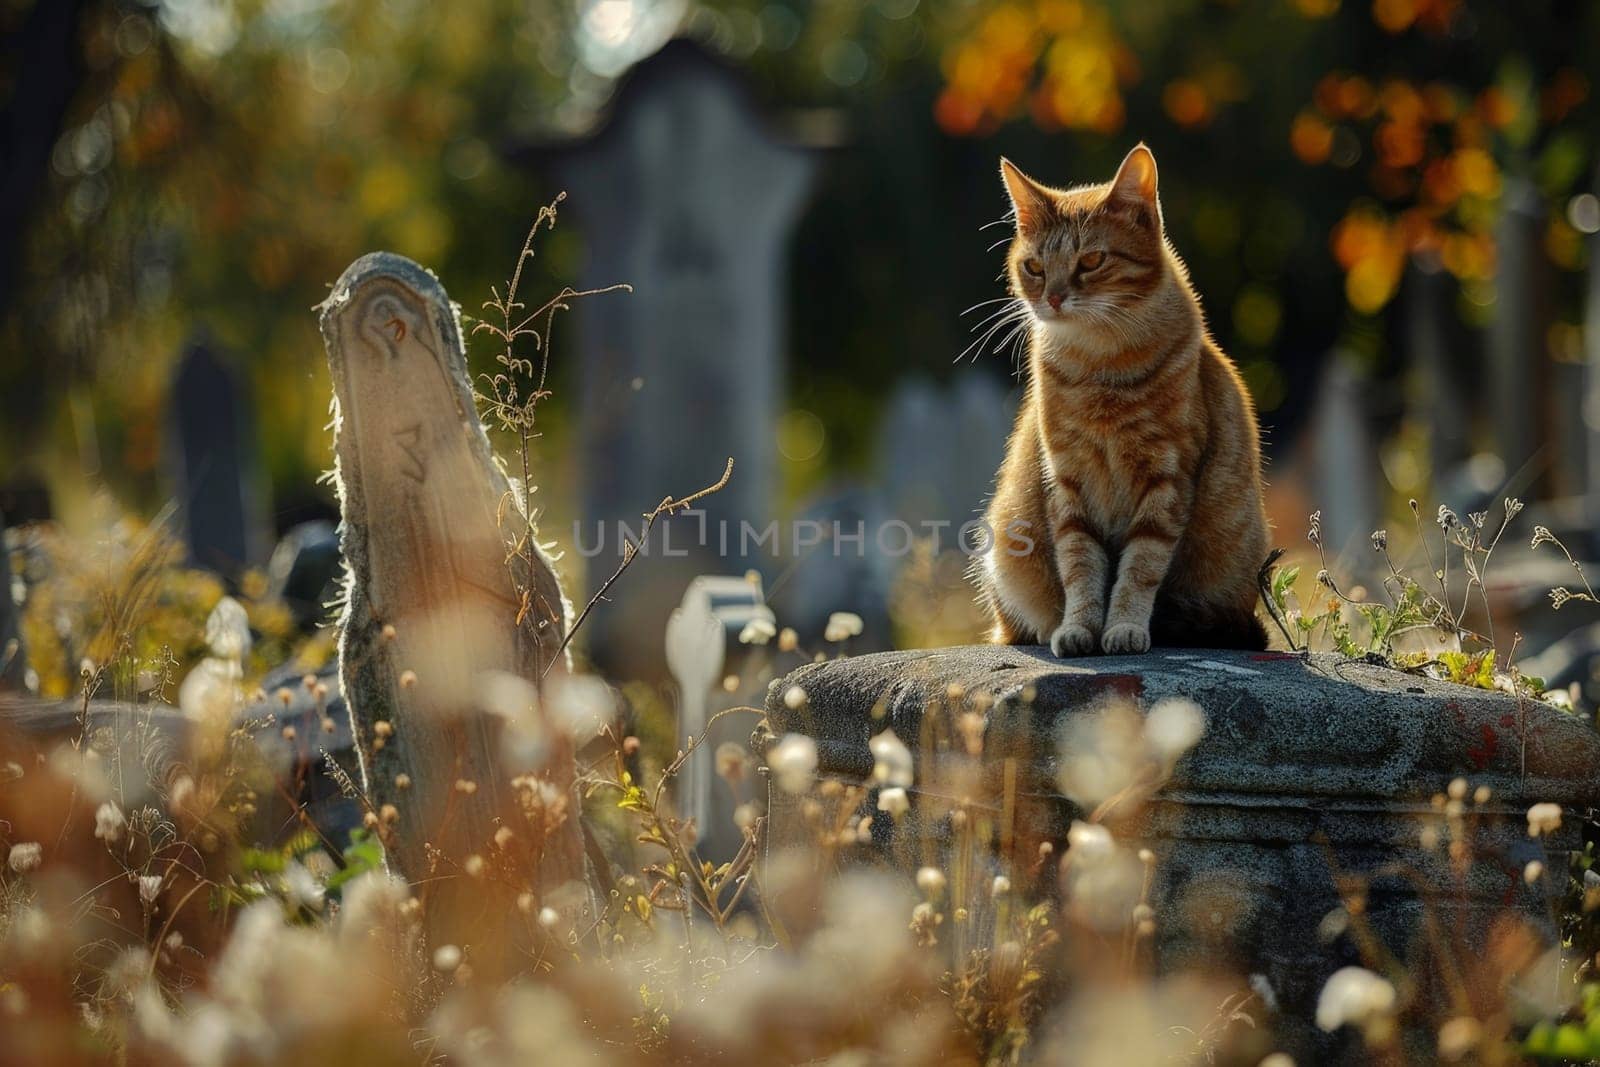 Cat in cemetery, A cat sitting next to a grave in a cemetery, In remembrance of a pet by nijieimu